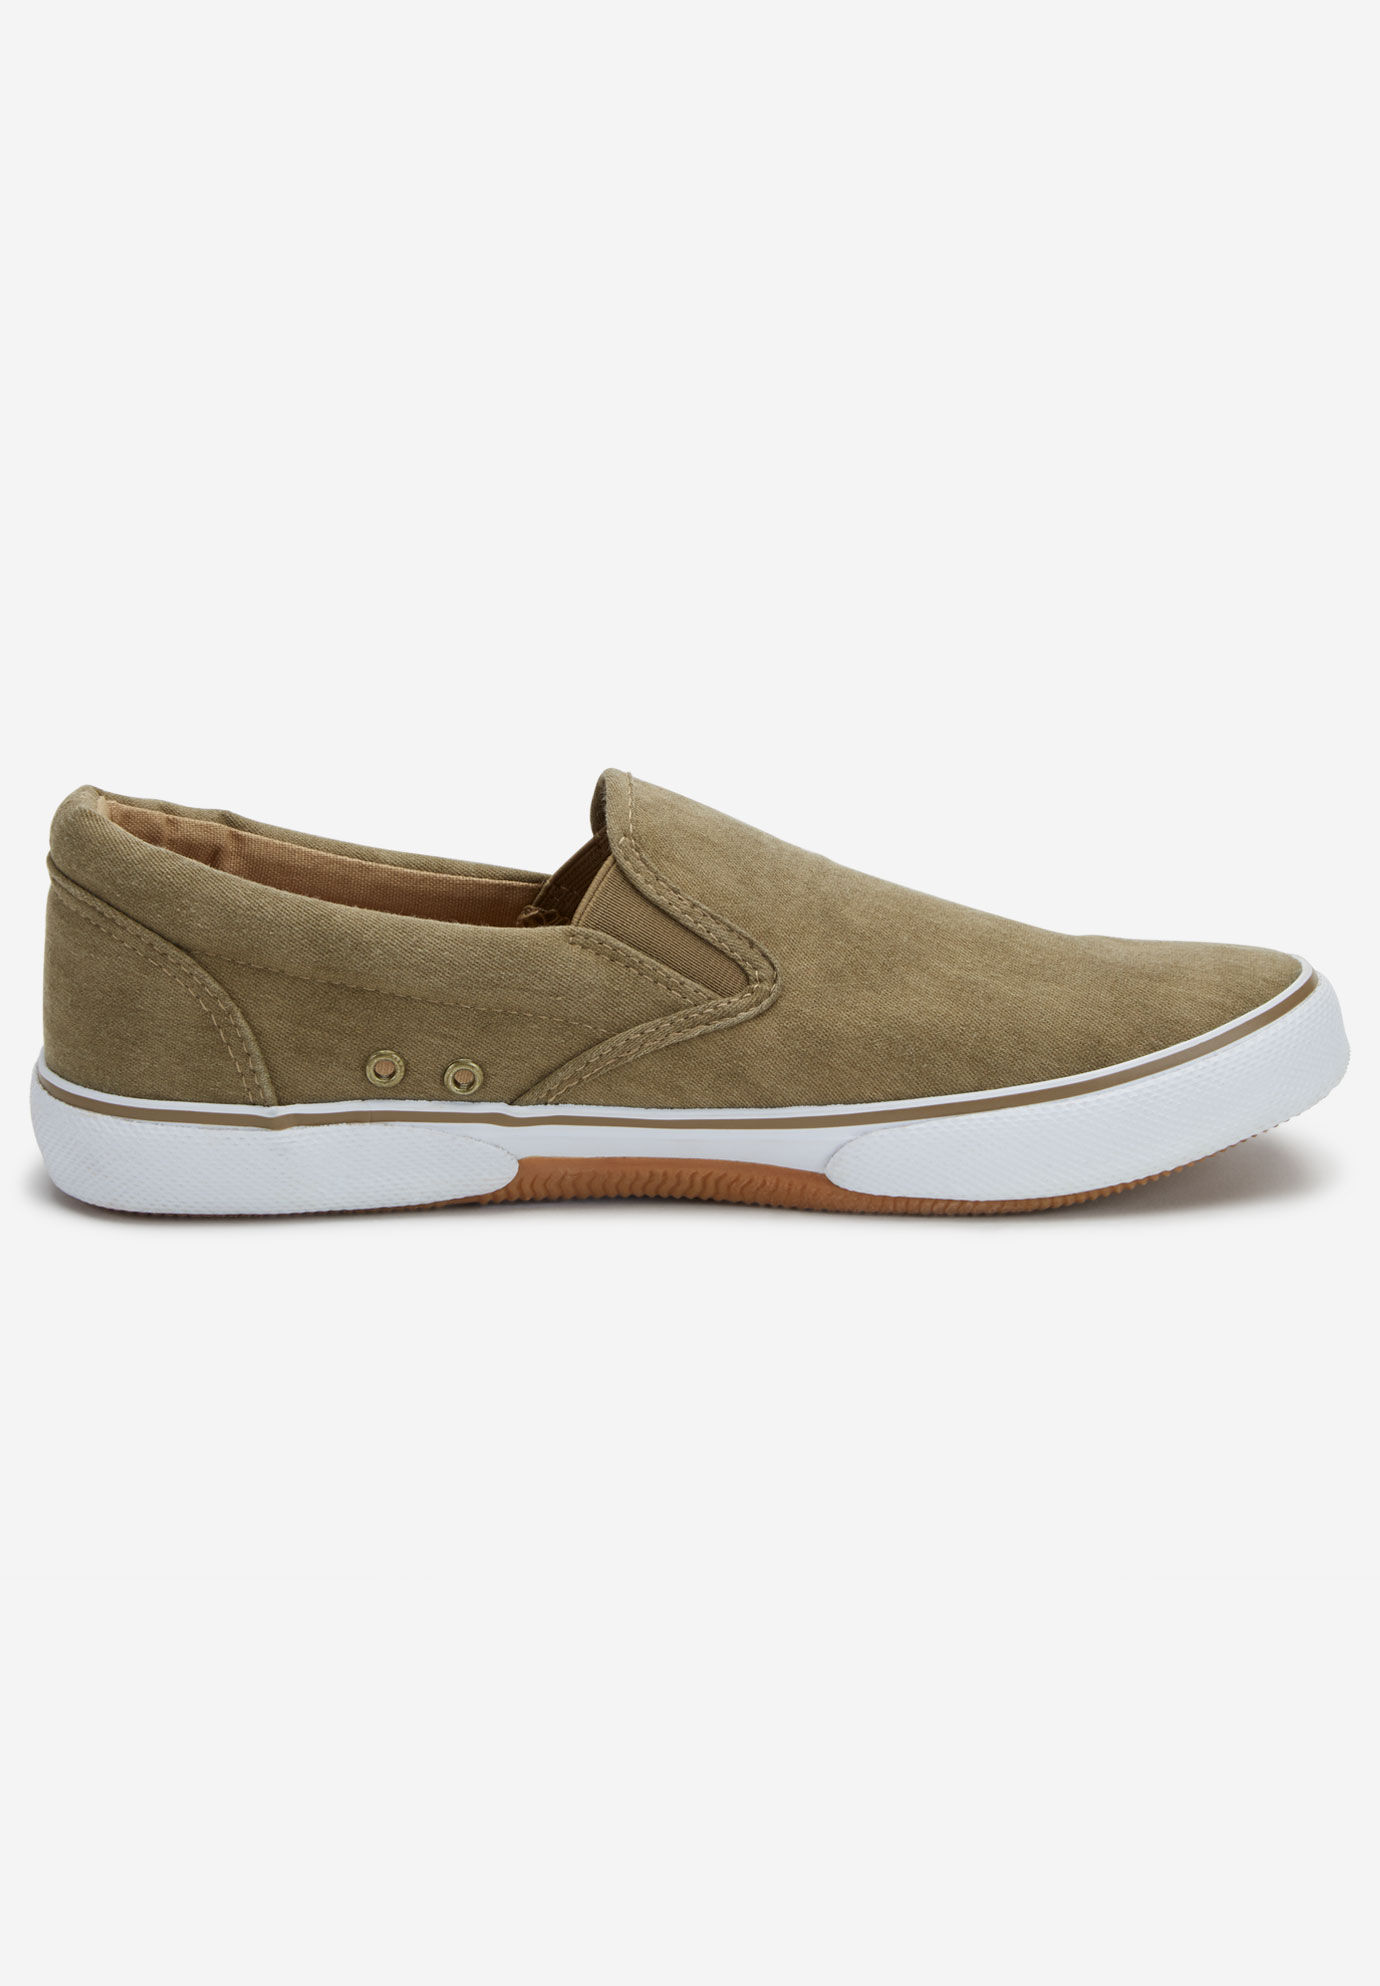 wide canvas slip on shoes